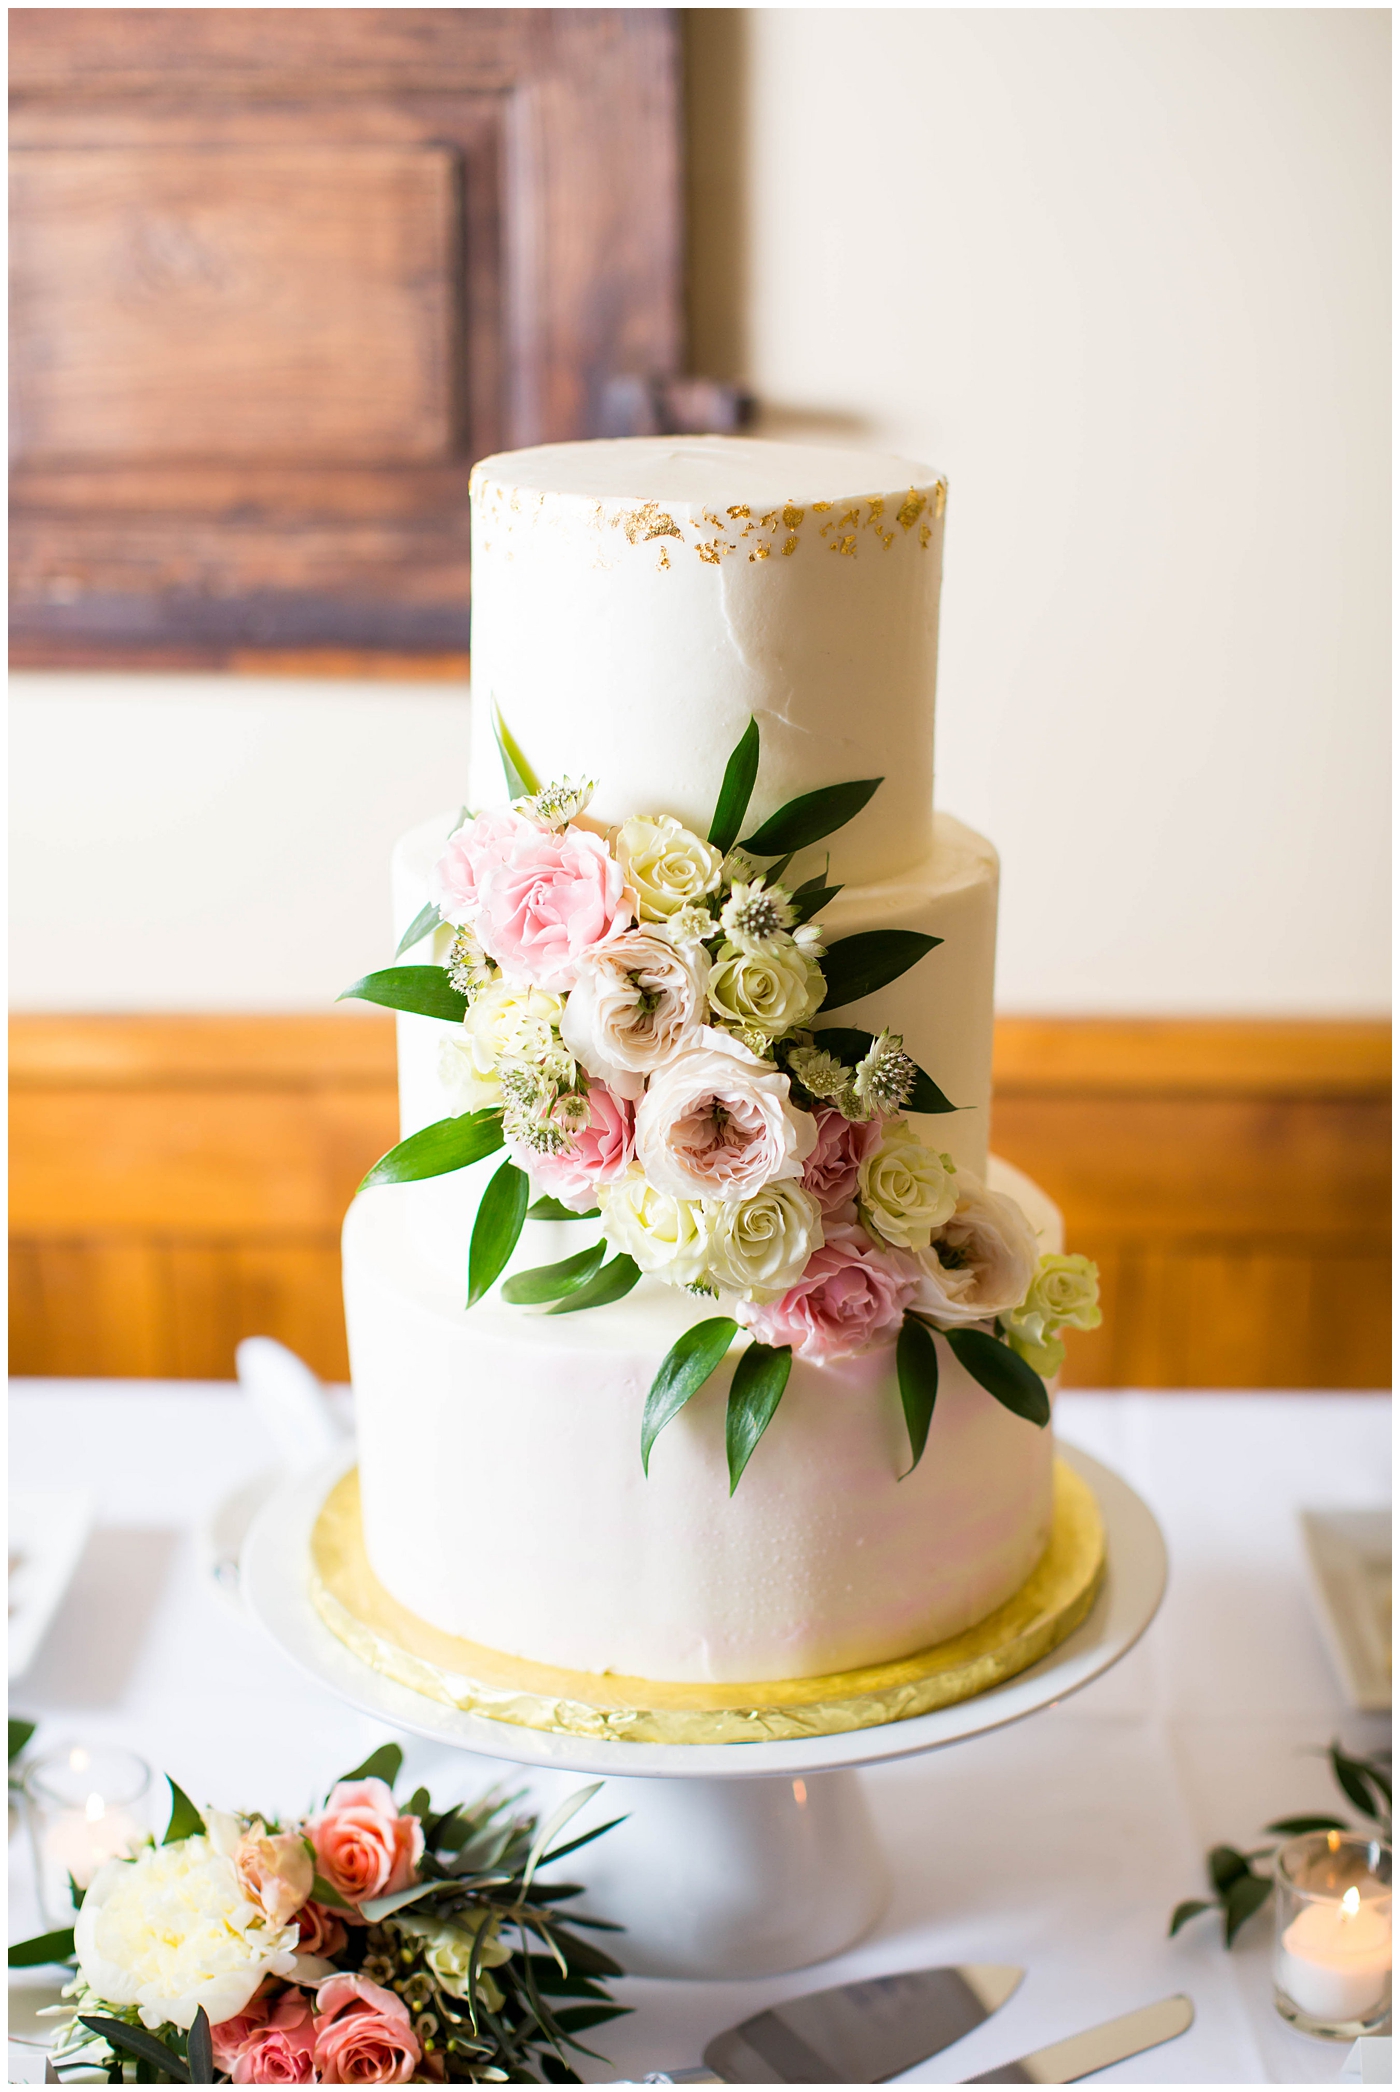 white wedding cake with gold foil and white and pink roses at wedding reception